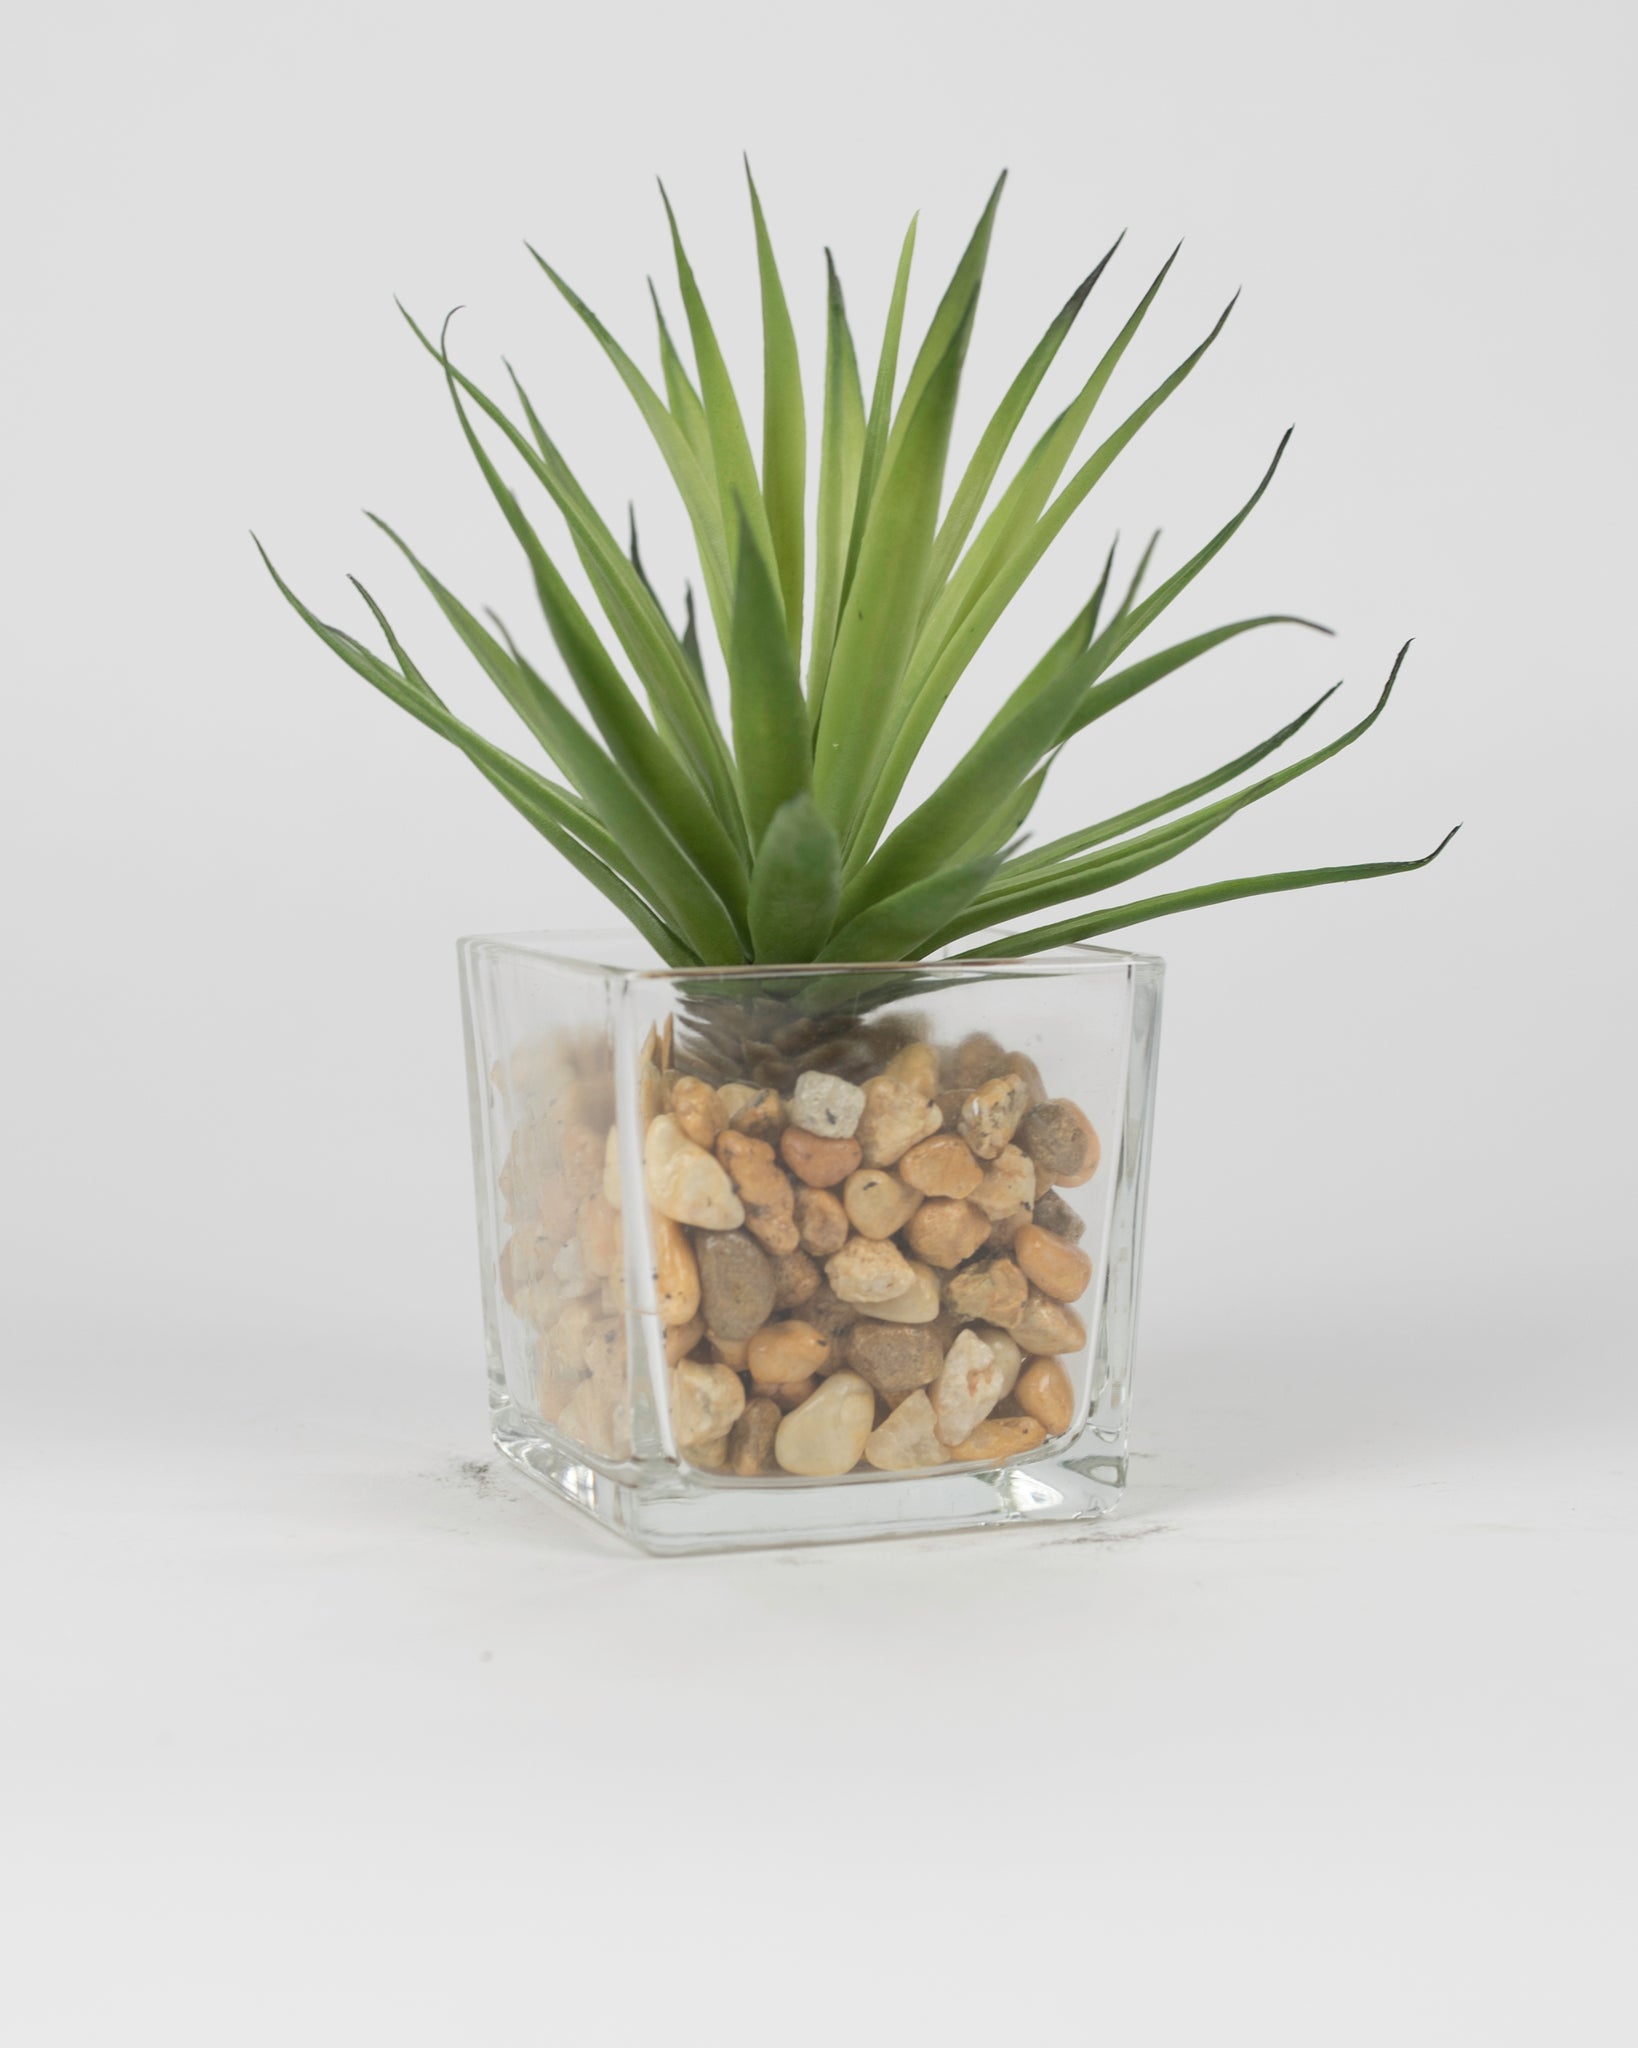 Green Agave in Rocks with Glass Pot